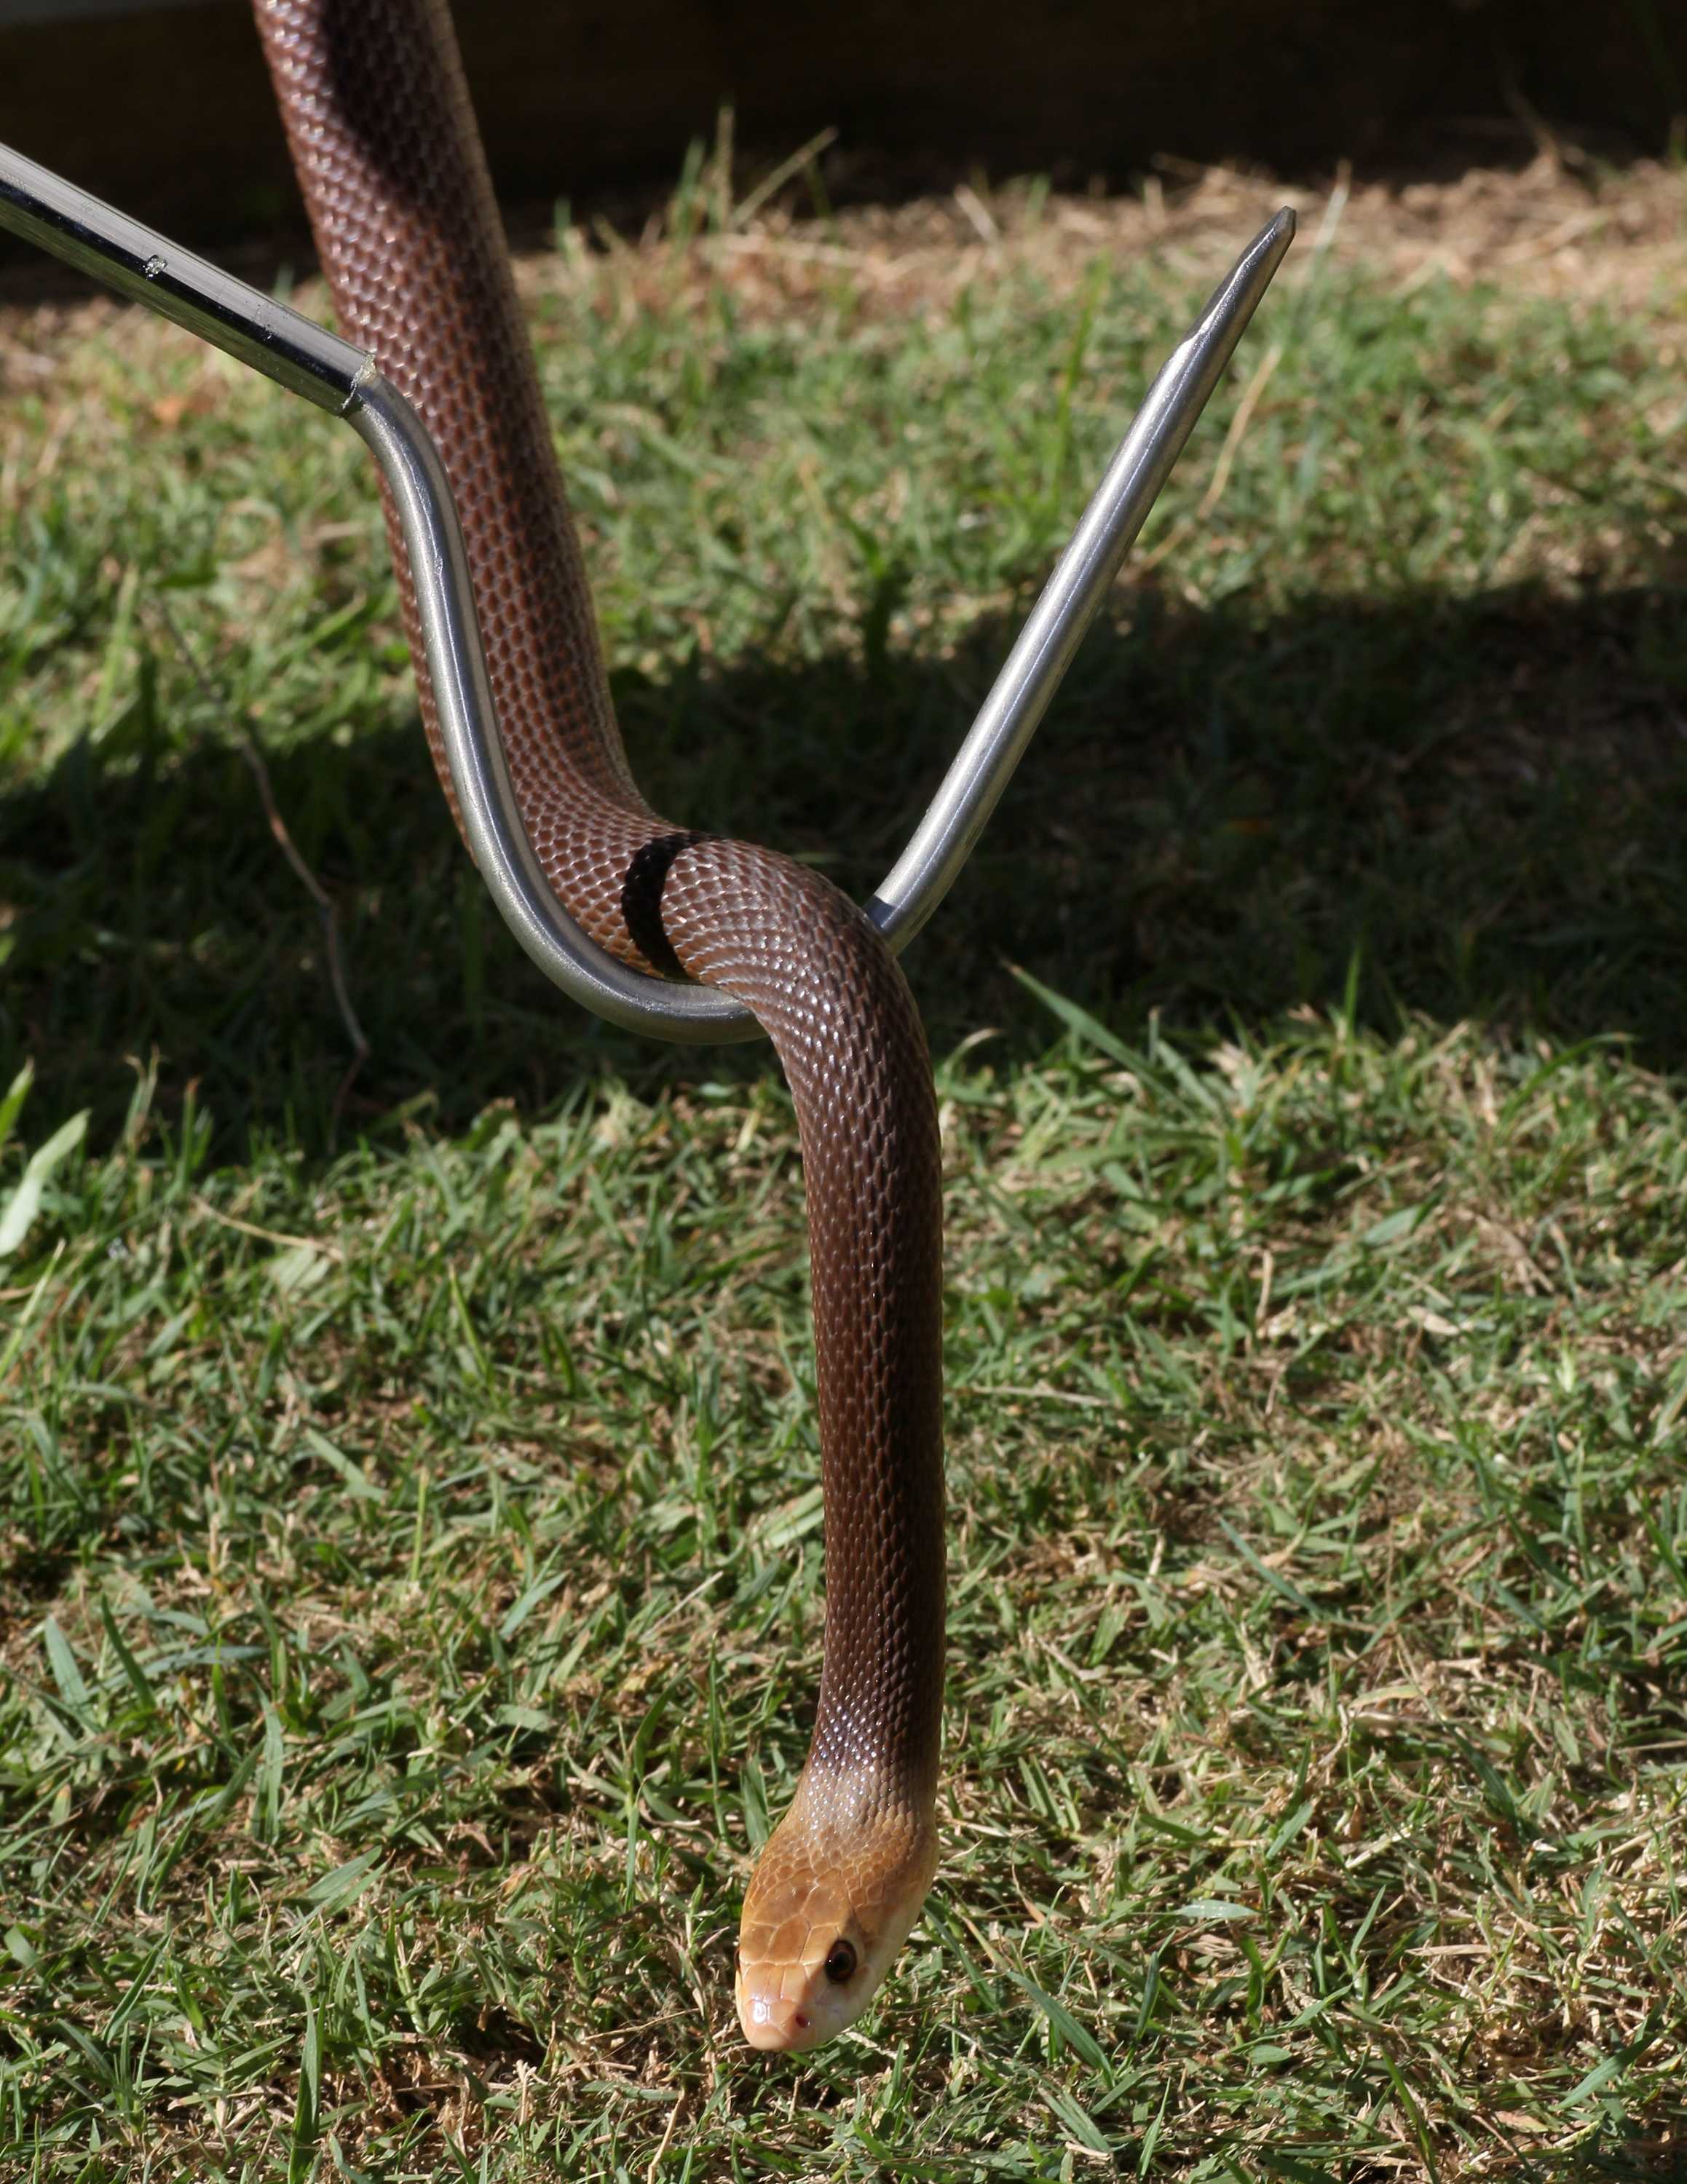 Snake handler turns old golf clubs into handling hooks to help prevent  reptile deaths - ABC News